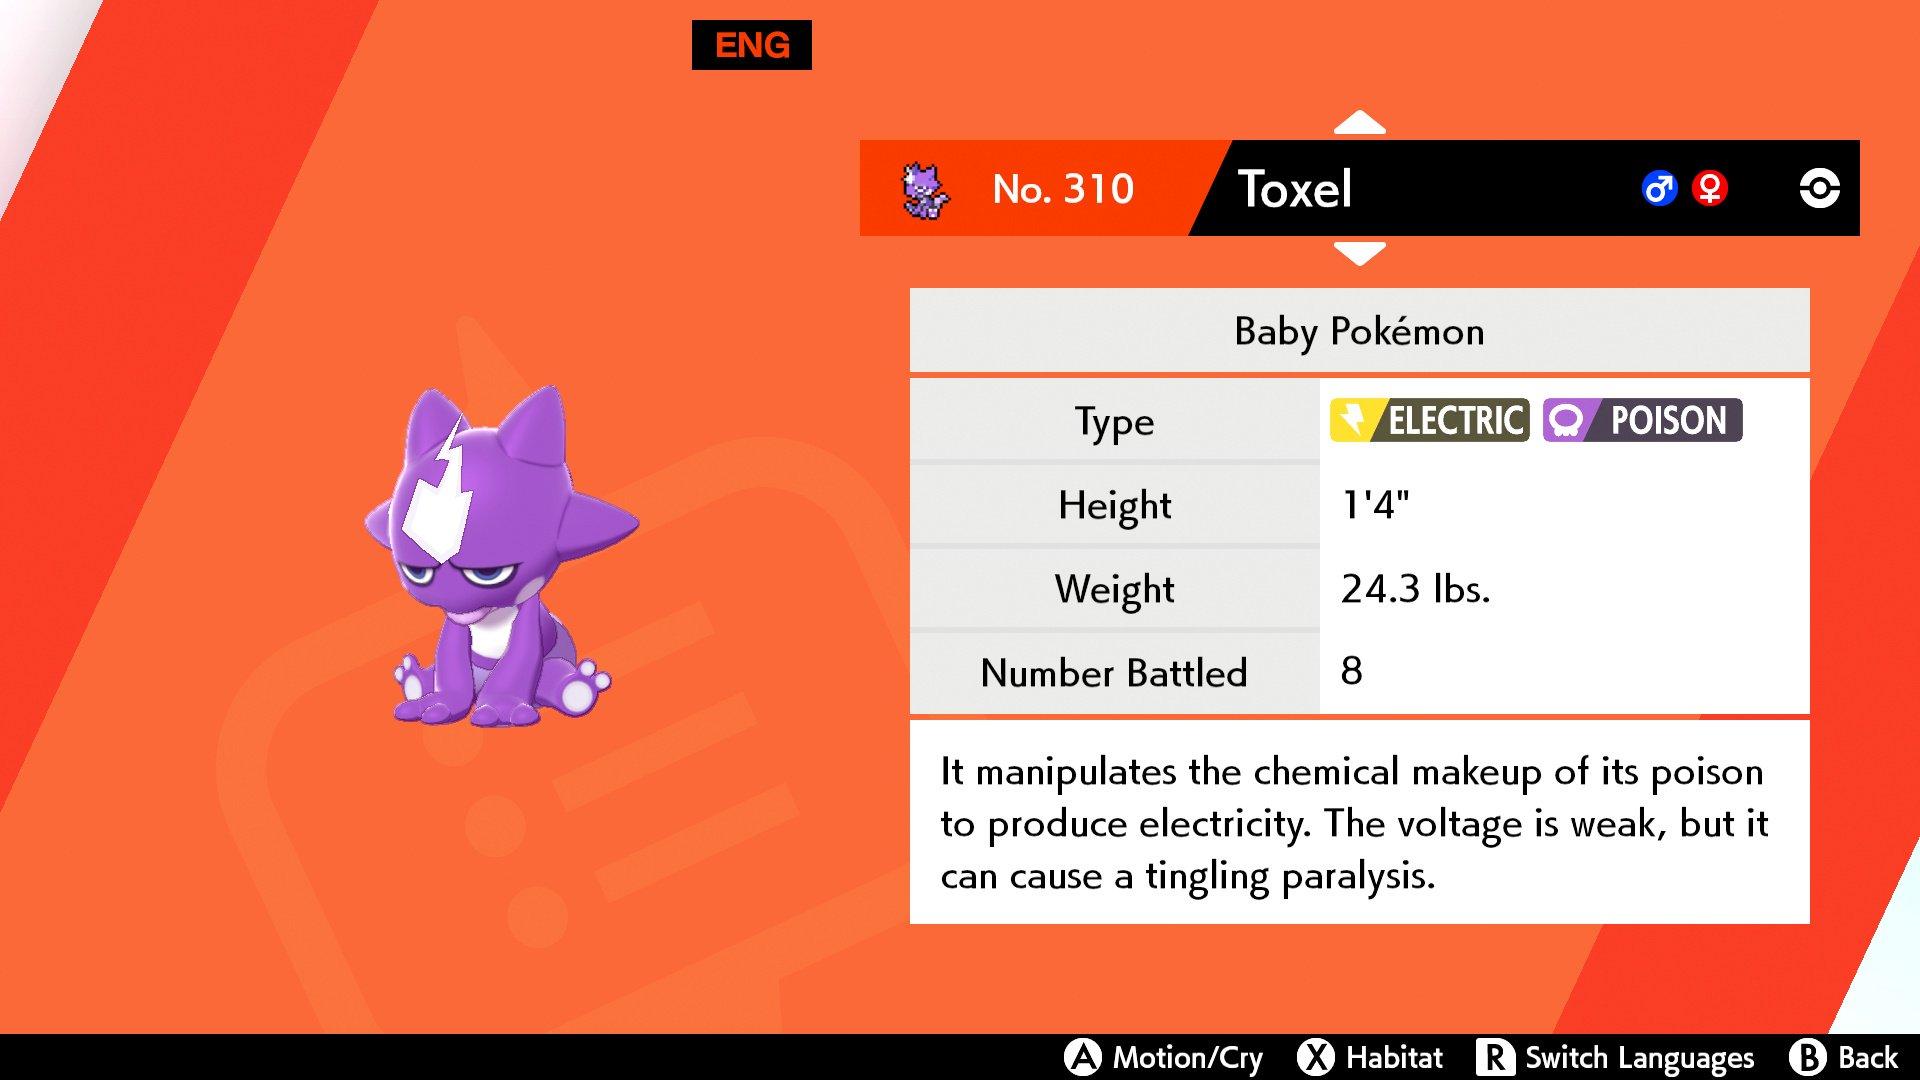 Pokémon Sword And Shield's Toxel: How To Find And Evolve